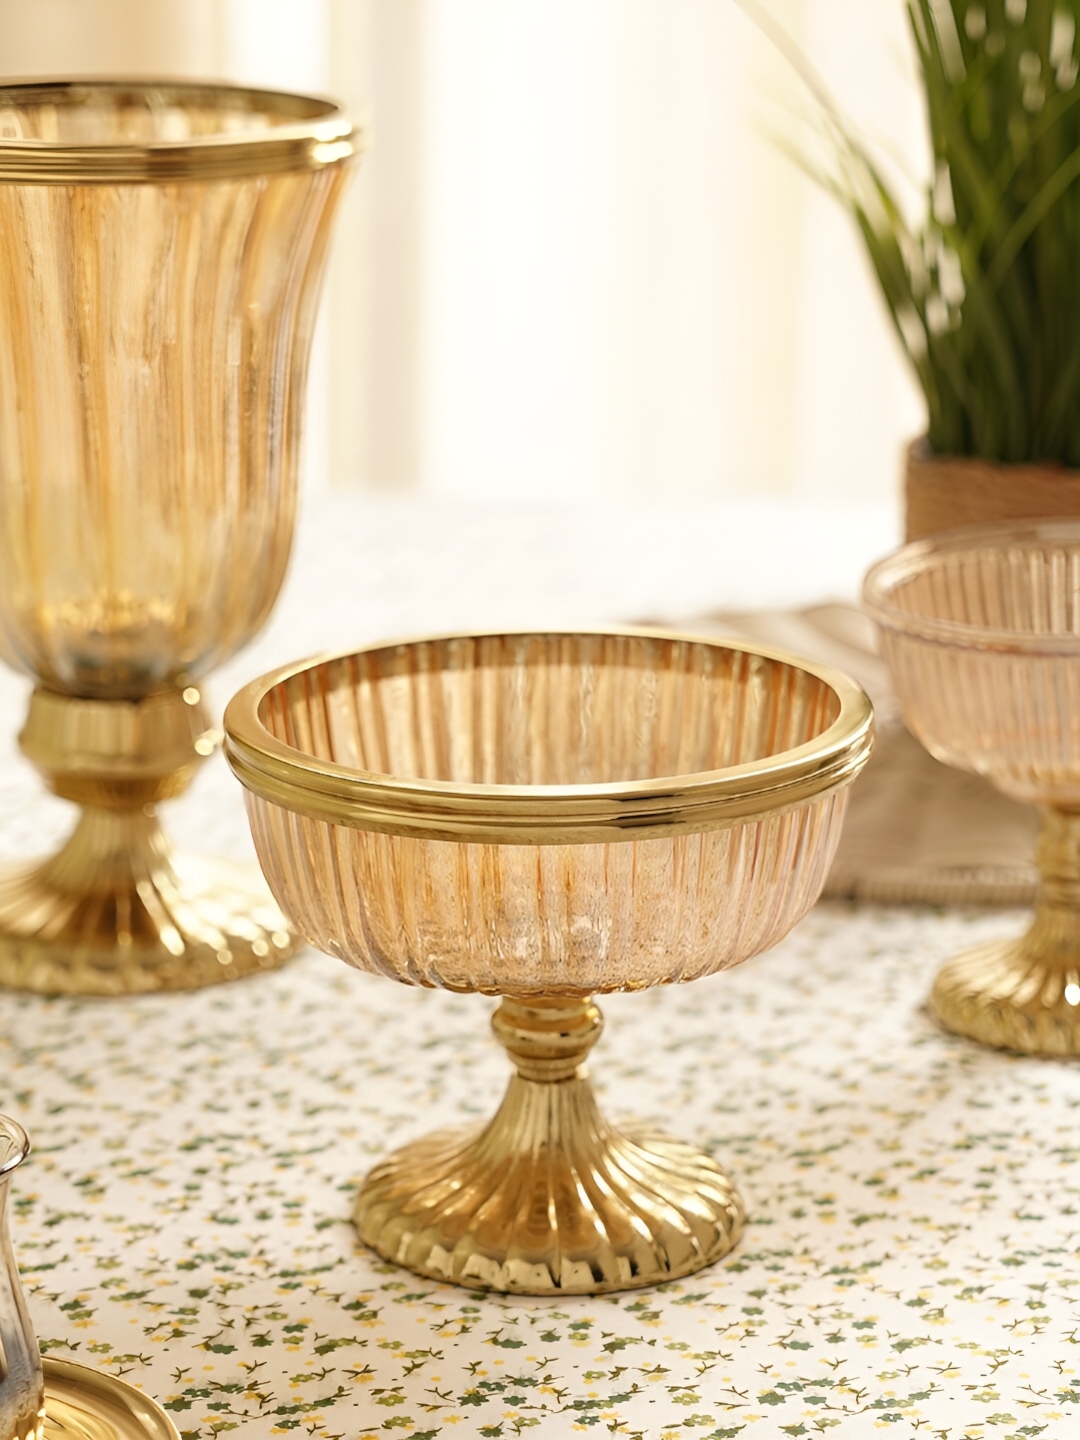 

Pure Home and Living Gold Toned Textured Glass Decorative Bowl With Stand